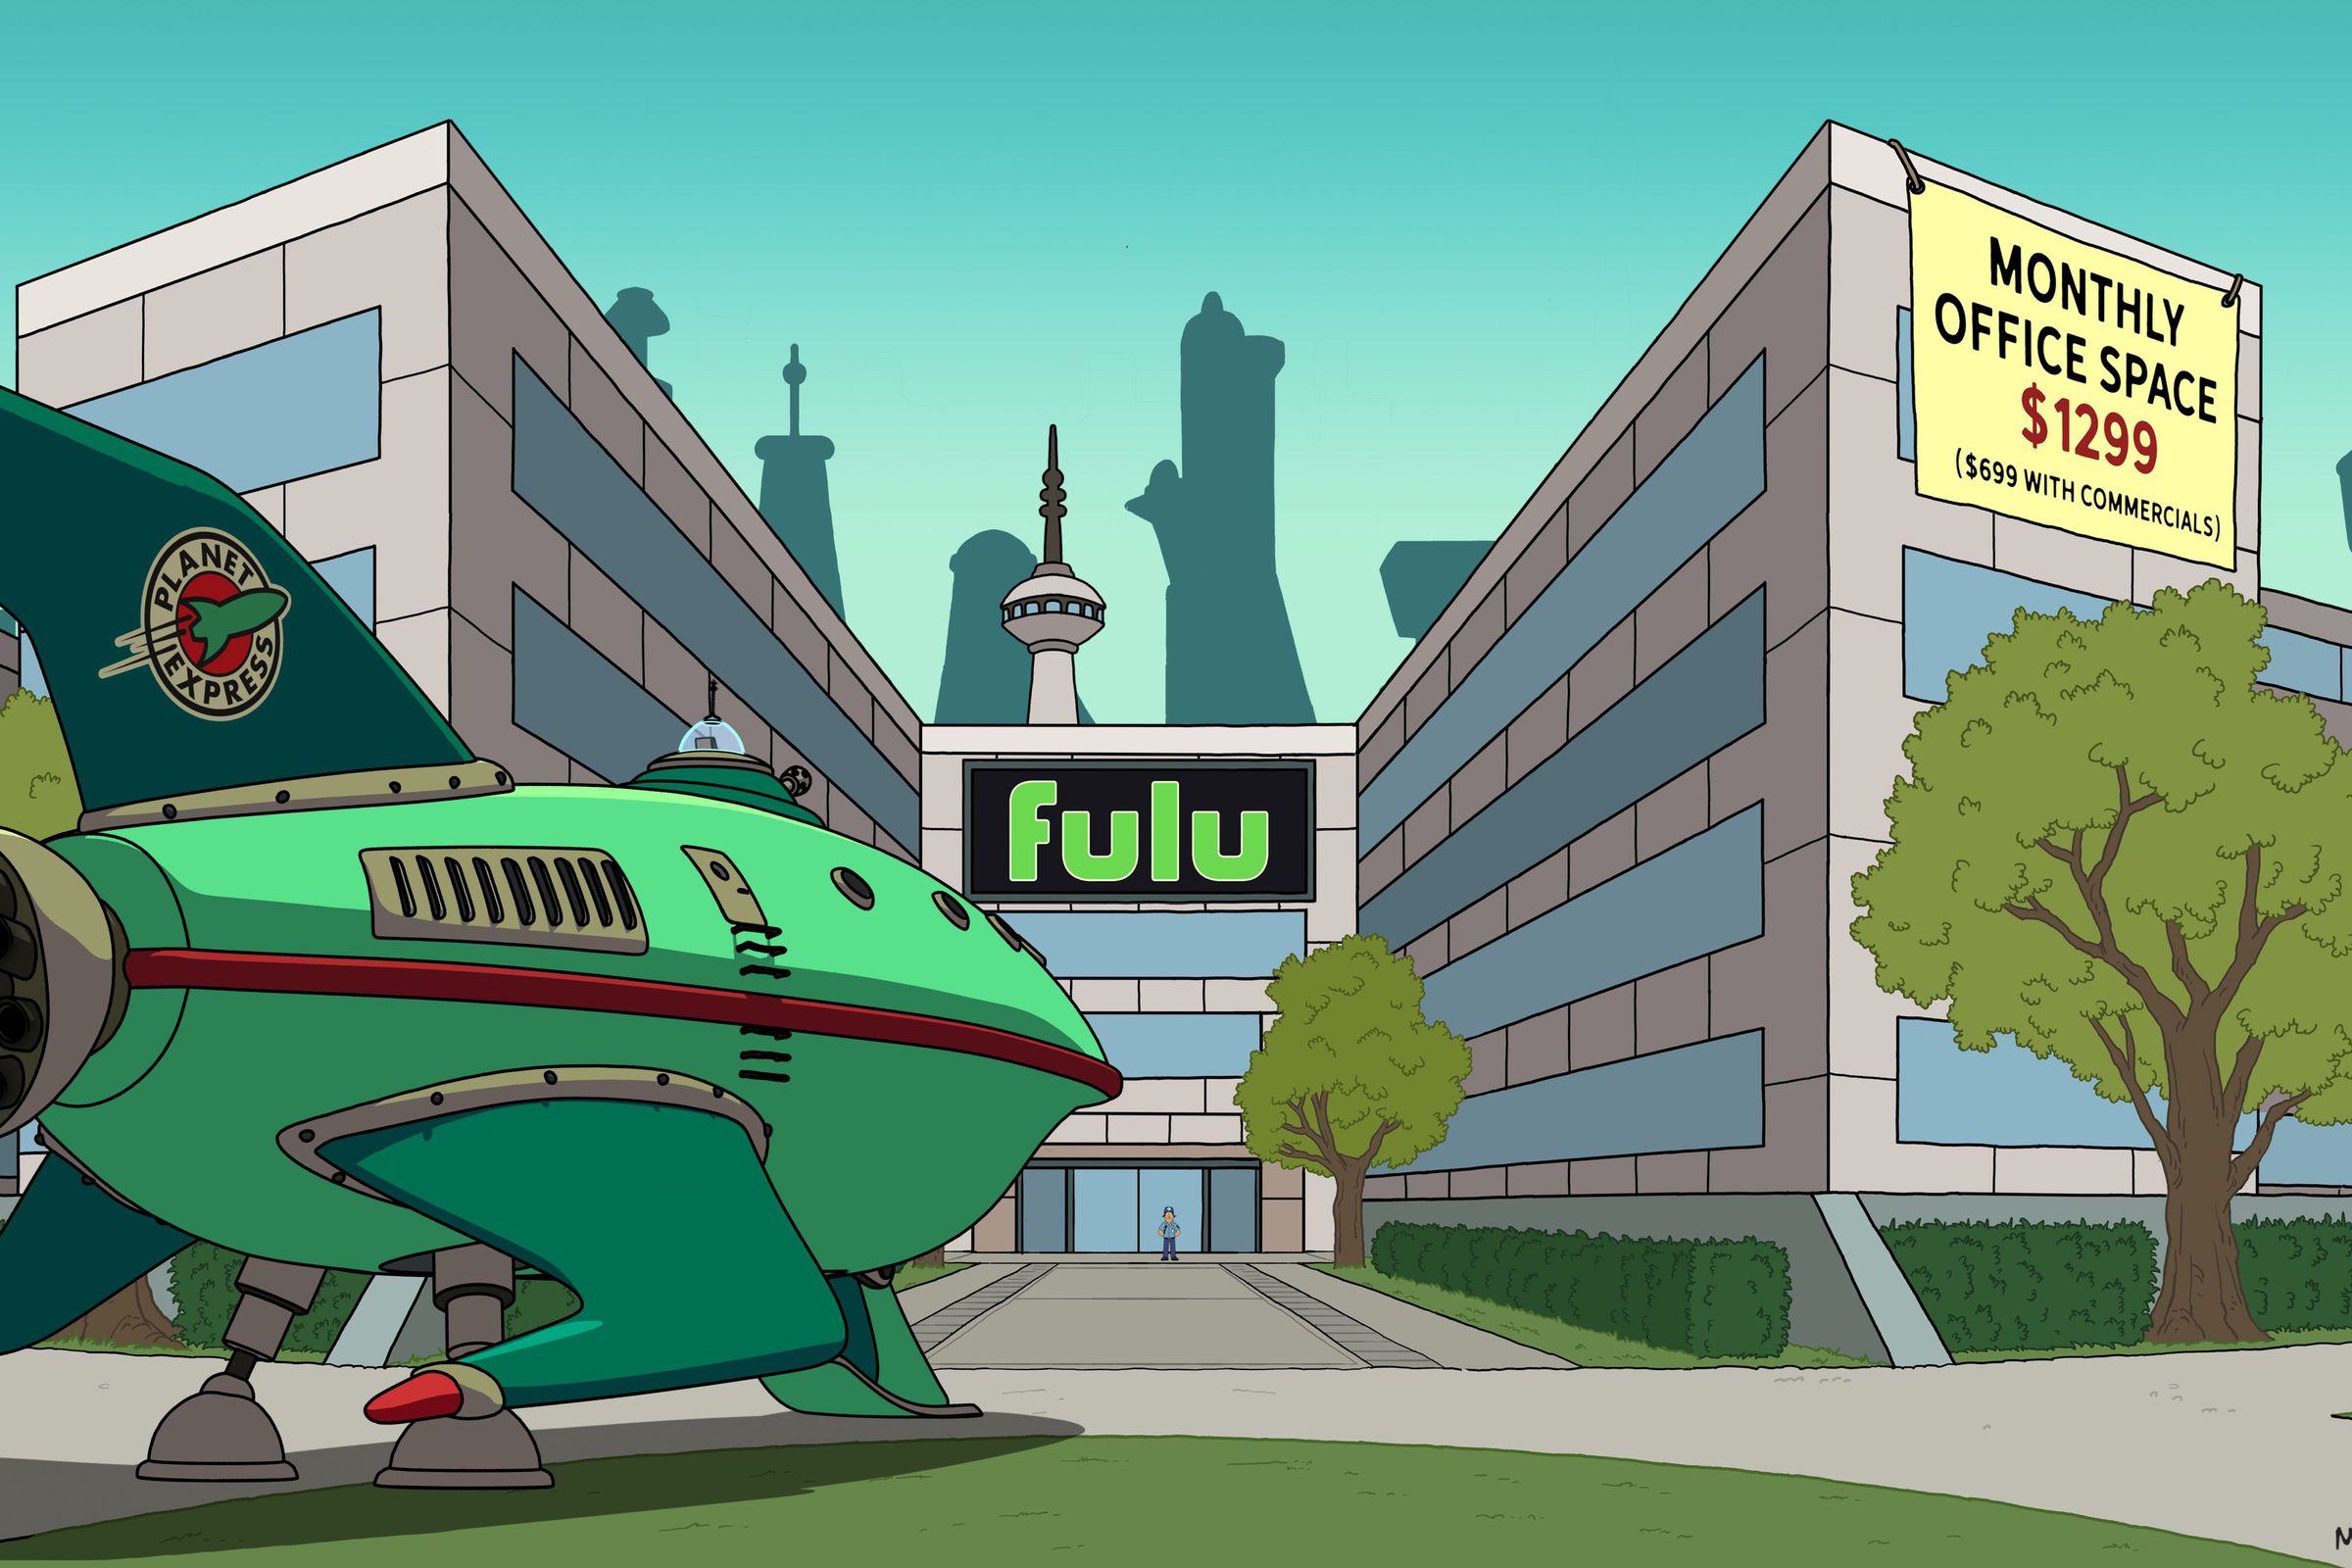 An image of the Planet Express ship sitting in front of Hulu’s offices, with a sign saying “Monthly office space $1299,” and below: “($699 with commercials).”